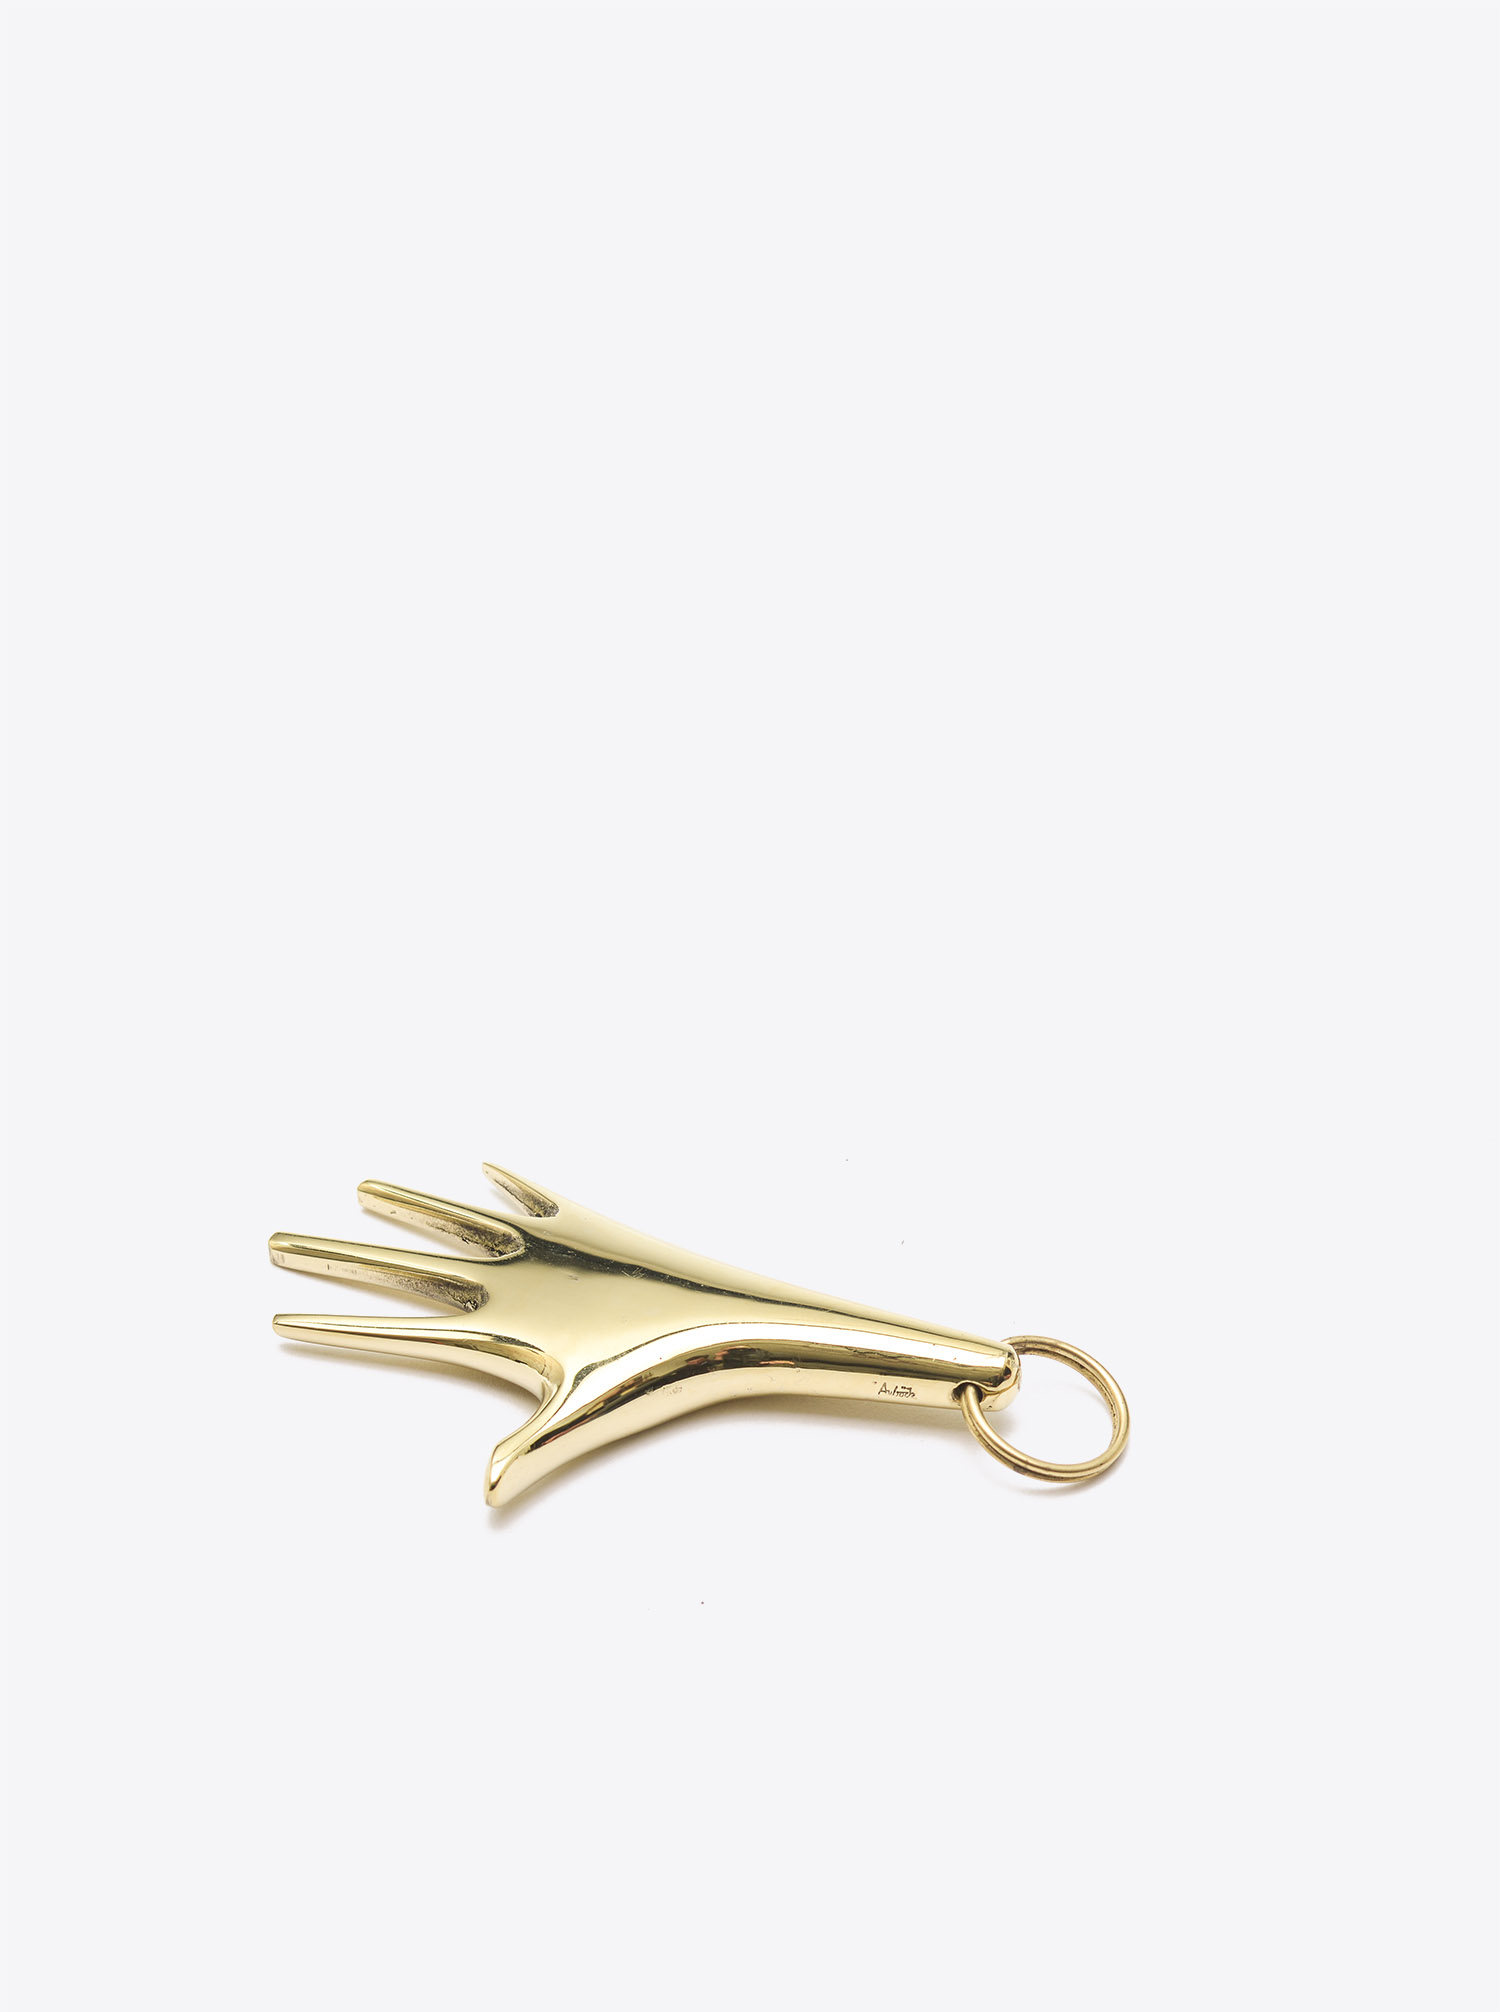 Key Chain &quot;Hand&quot; large Brass polished